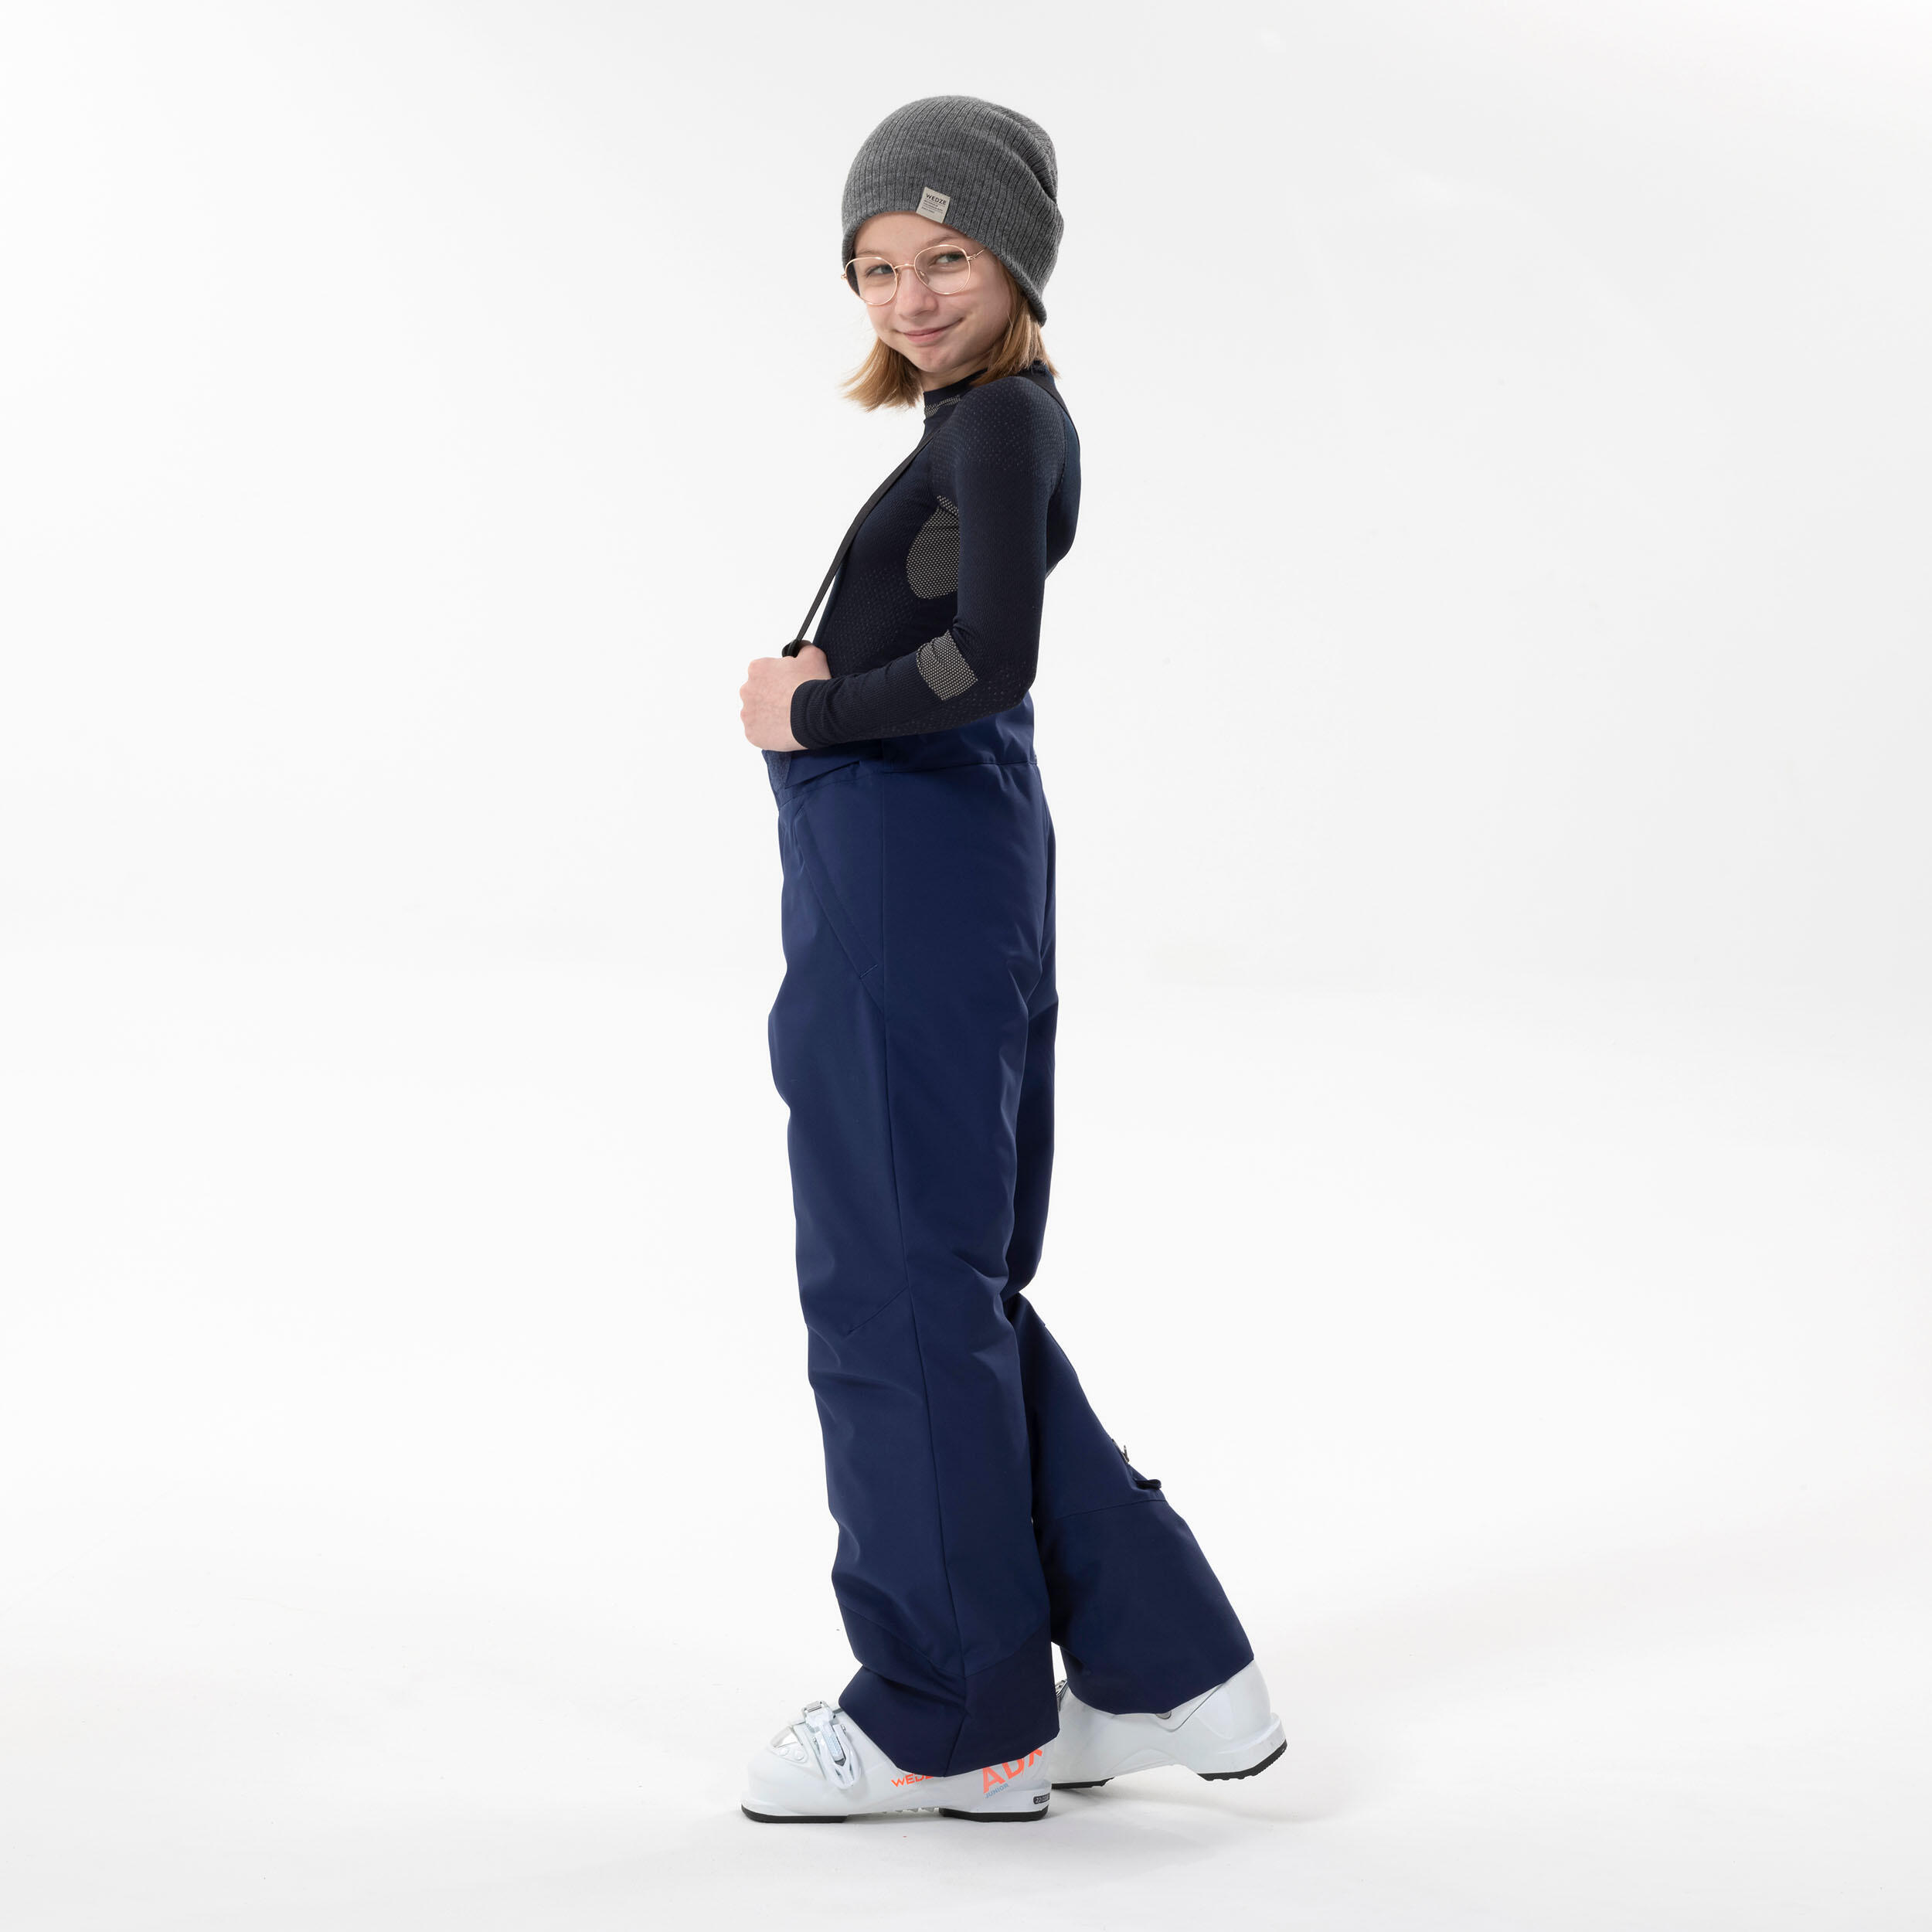 KIDS’ WARM AND WATERPROOF SKI TROUSERS  - 500 PNF - NAVY BLUE 2/8